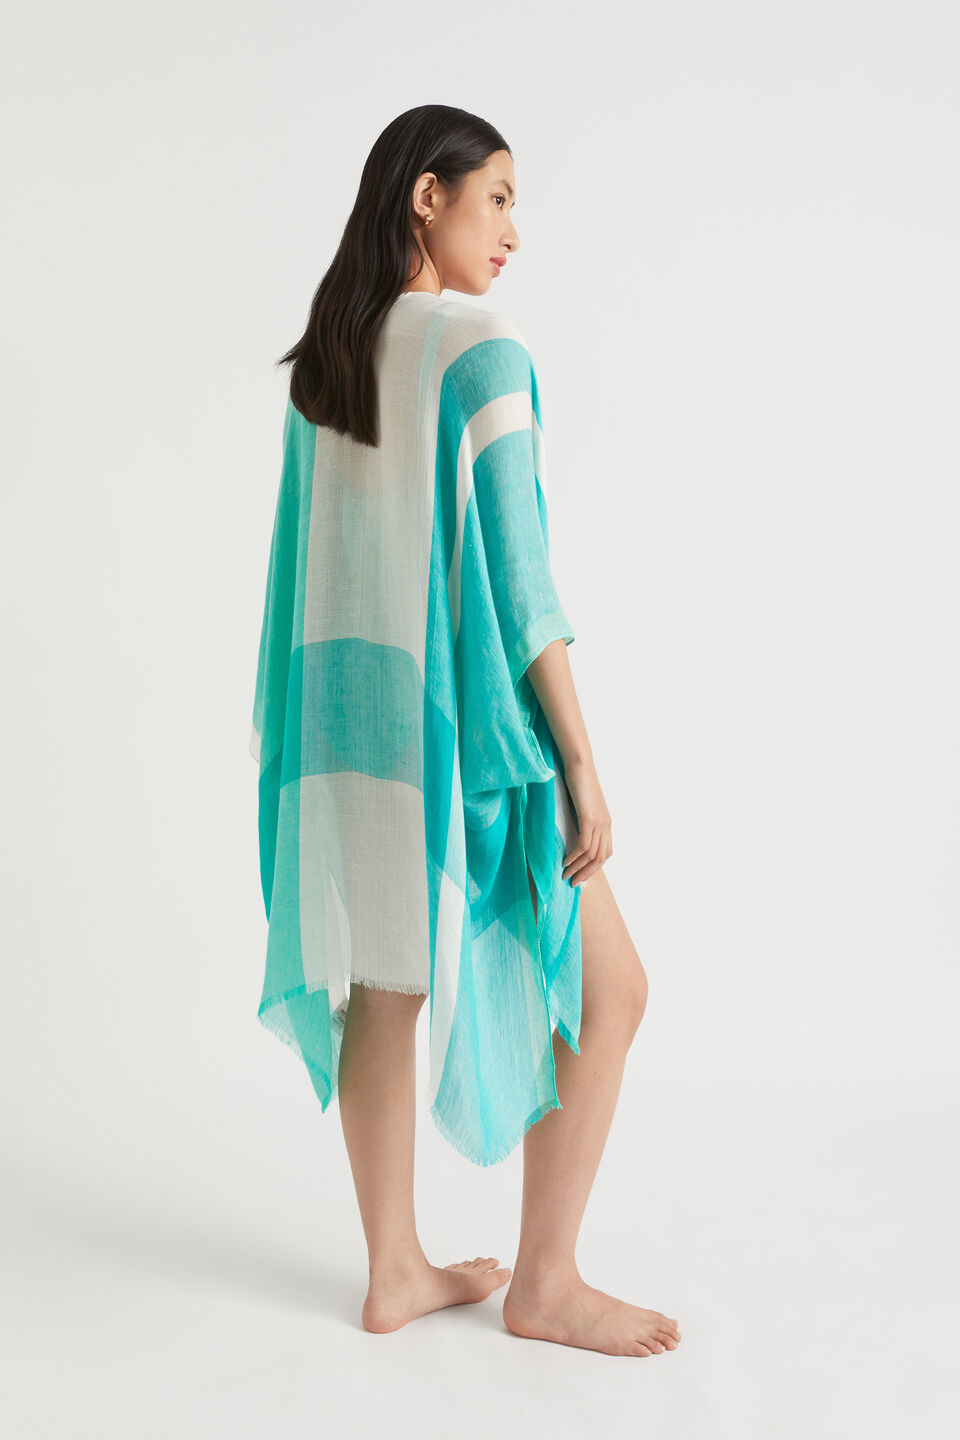 Oversized Check Poncho  Deep Teal Multi  hi-res